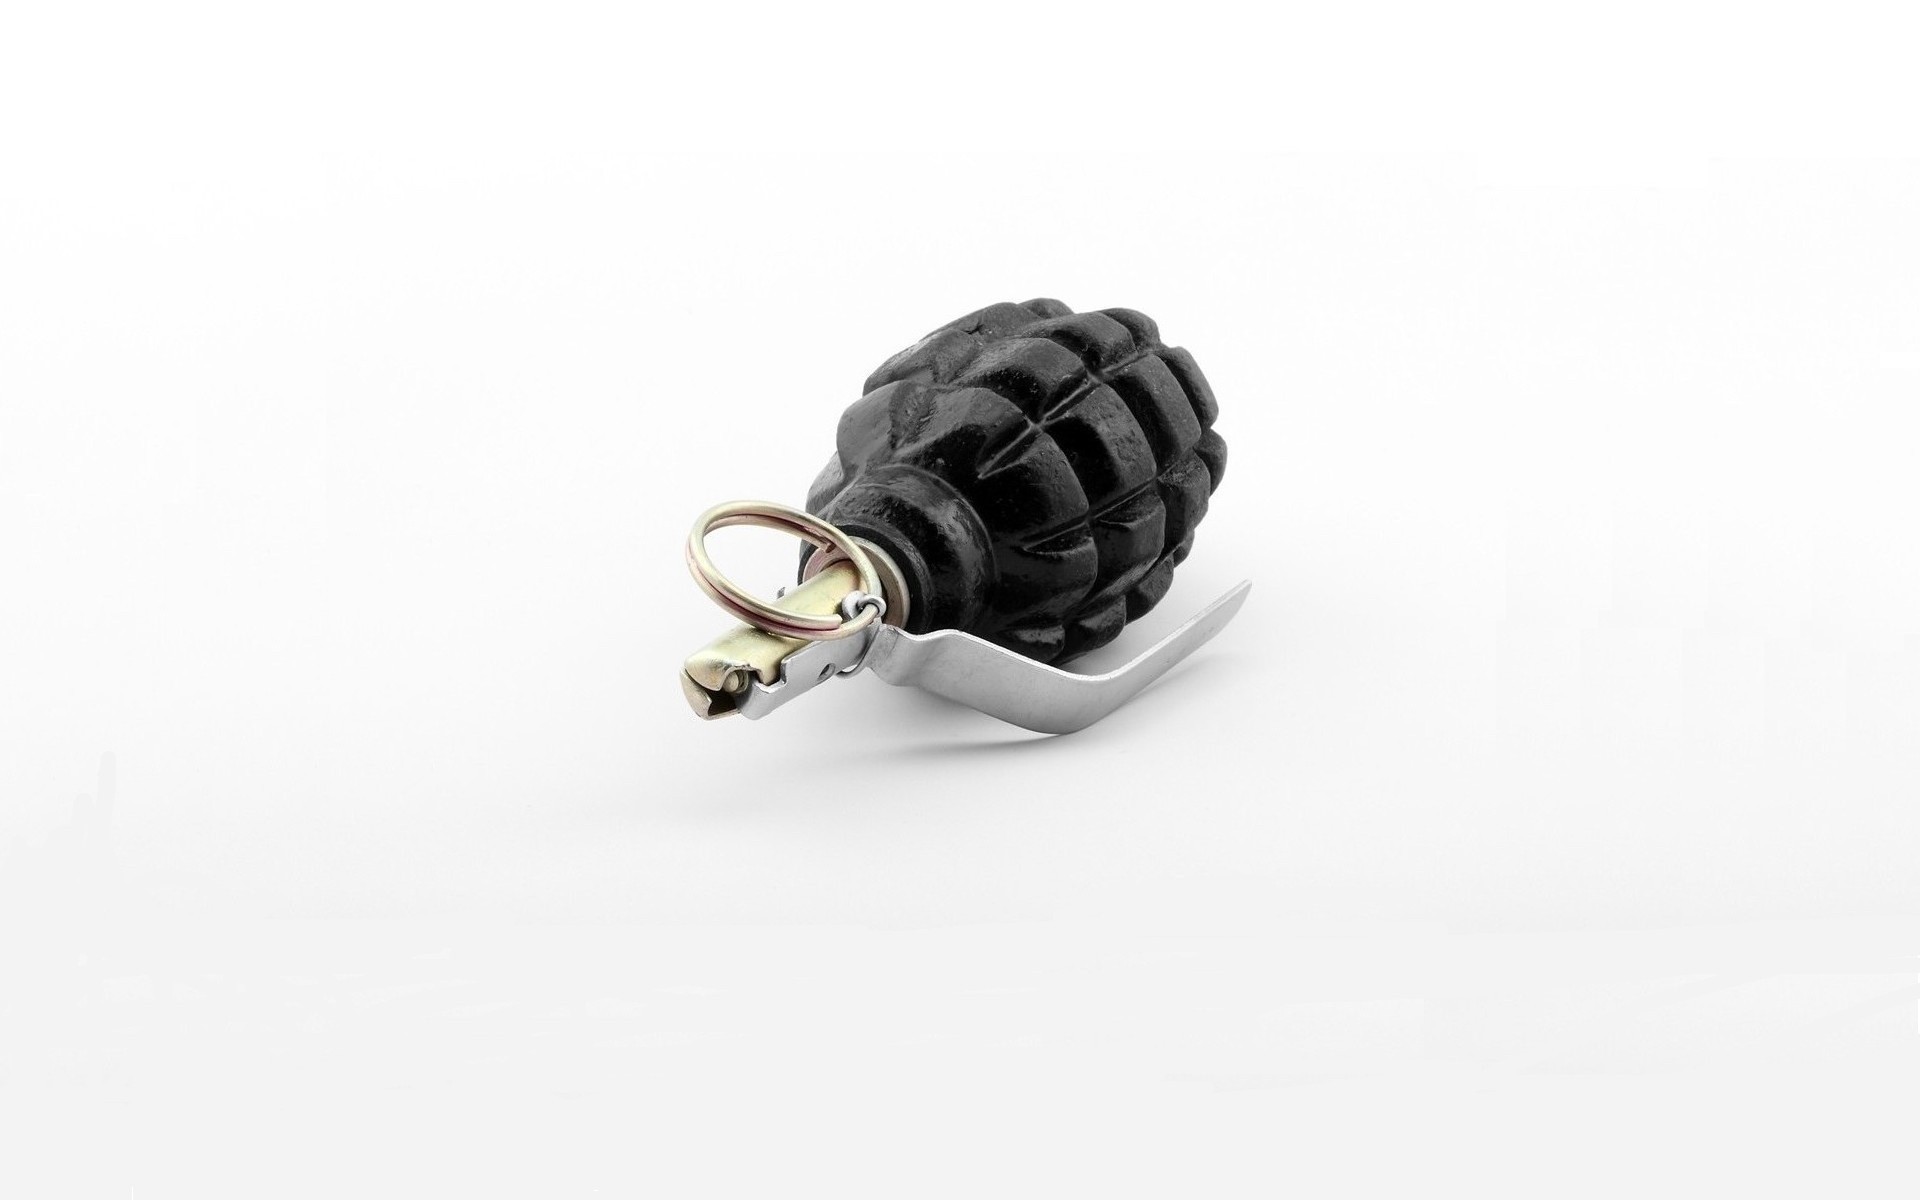 Russian Army Grenades Simple Background White Background 1920x1200